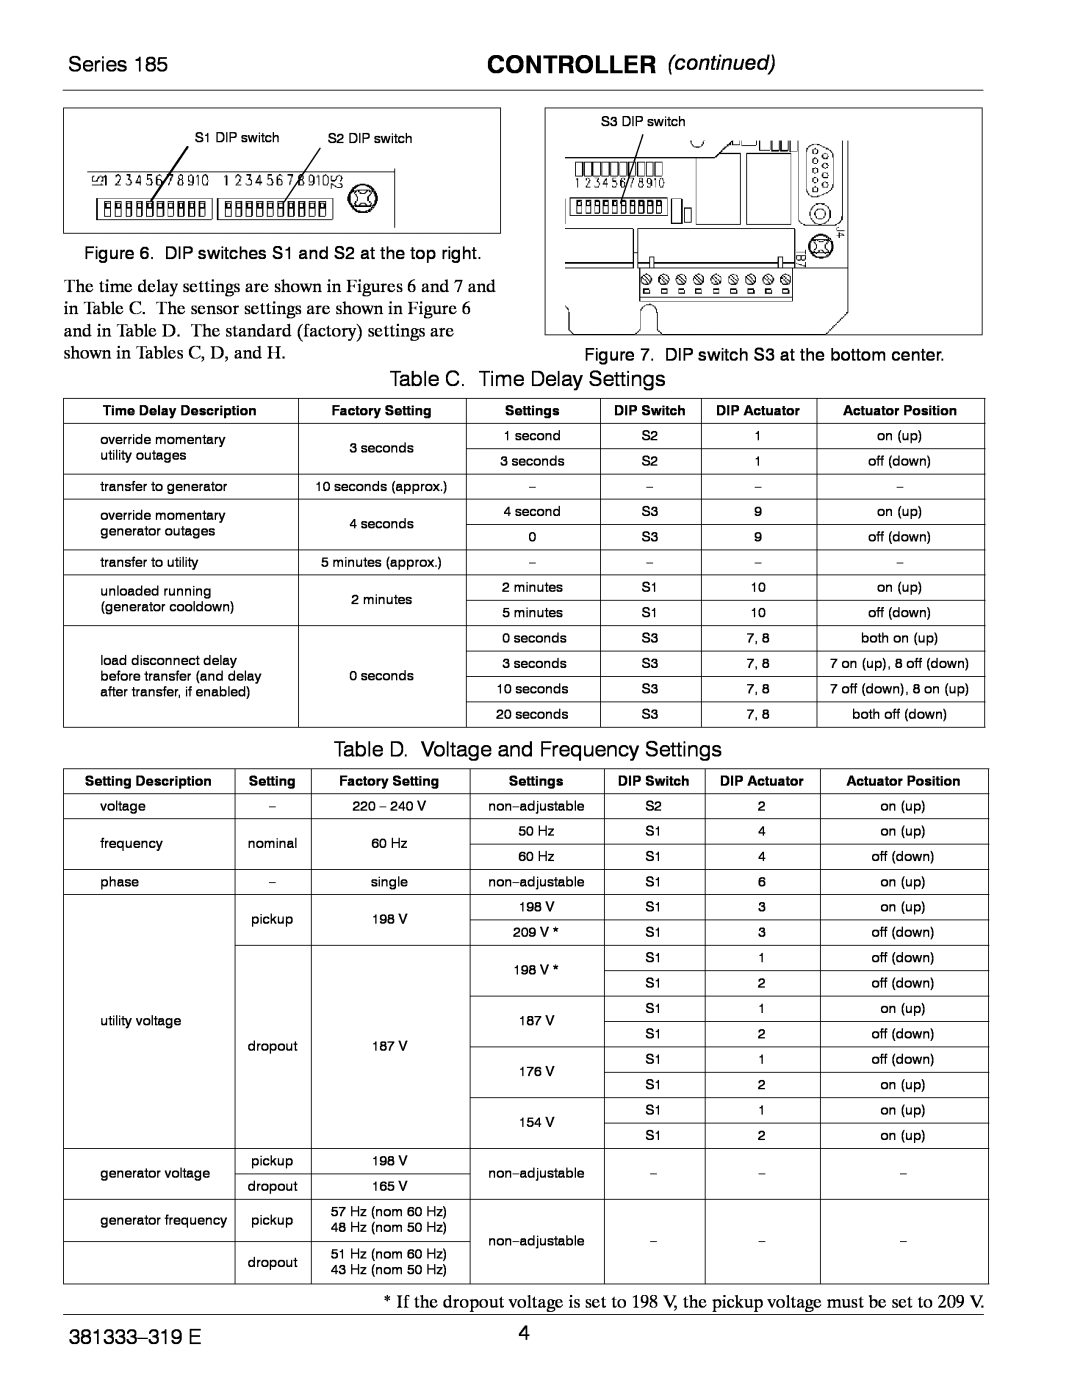 Emerson 185 manual CONTROLLER continued, Series, Table C. Time Delay Settings, Table D. Voltage and Frequency Settings 